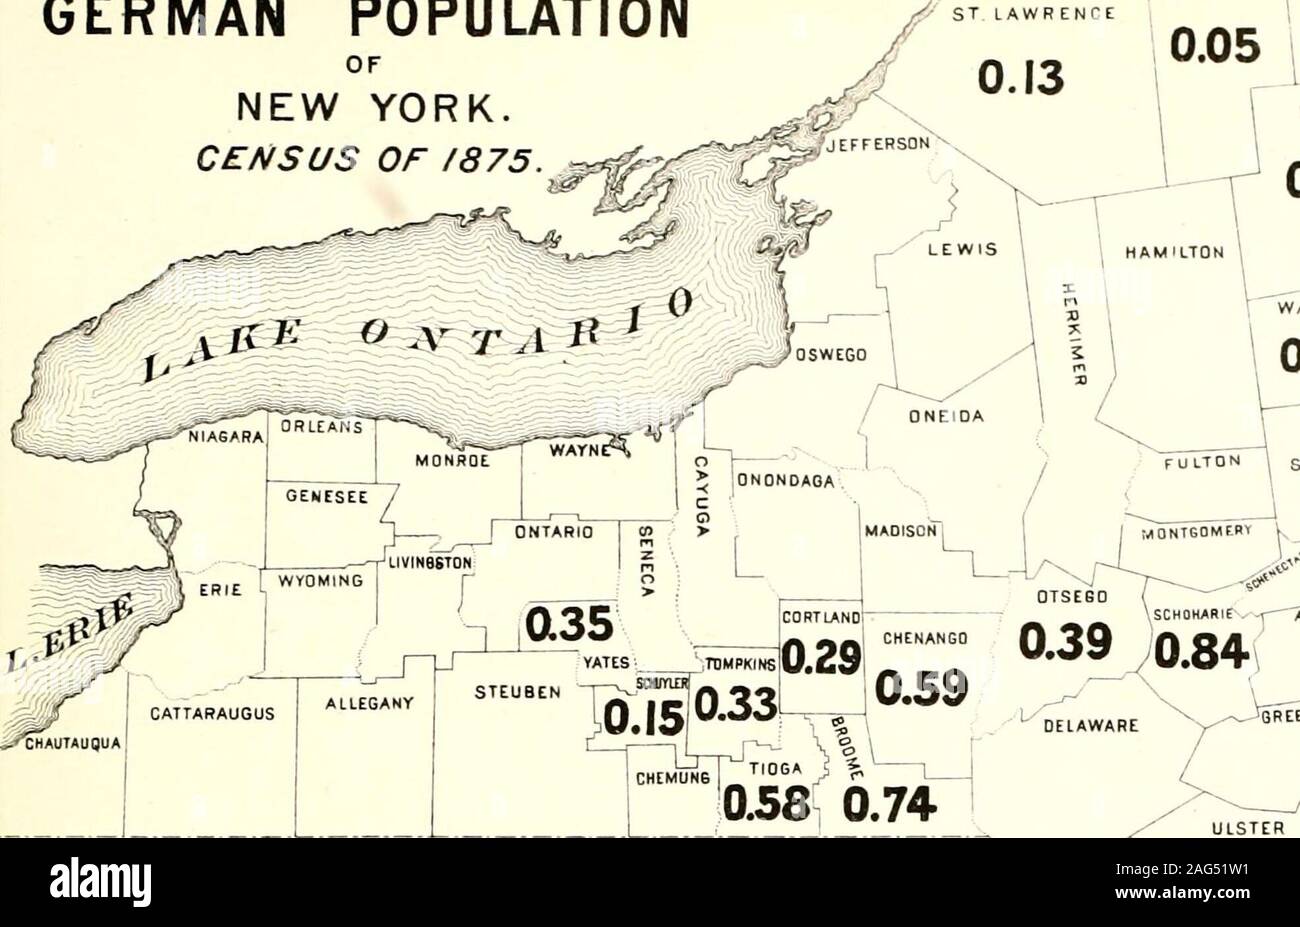 . Census of the state of New York for 1875. GERMAN POPULATION OF NEW YORK. 1- vFKANKLIN CLINTON C Uf STLAWRENCE ^V. 0.05 ,0.29 I pi Co.n.,es. ^ j (4 , Schoharie,VJ B oome, 0.48 ff :?r° Essex,Otsego,I Yates,! Tompkins,I Washington,! Cortland,j Clinton, Schtiyler,St. Lawrence,Franklin. a32 PerCl. tS 46 0.84 47 0.74 48 0.59 49 0.58 50 0.4S 51 0.39 52 0.35 53 0 33 54 0.32 55 0 29 5b 0.29 57 0.19 58 0.15 59 0.13 60 0.05 CHENANGO CORTIAND YATES- ^iTtMPKINslO.ZSl ^. f^ STEUBCN T:^^^/* OOI 1 0*59 Stock Photo